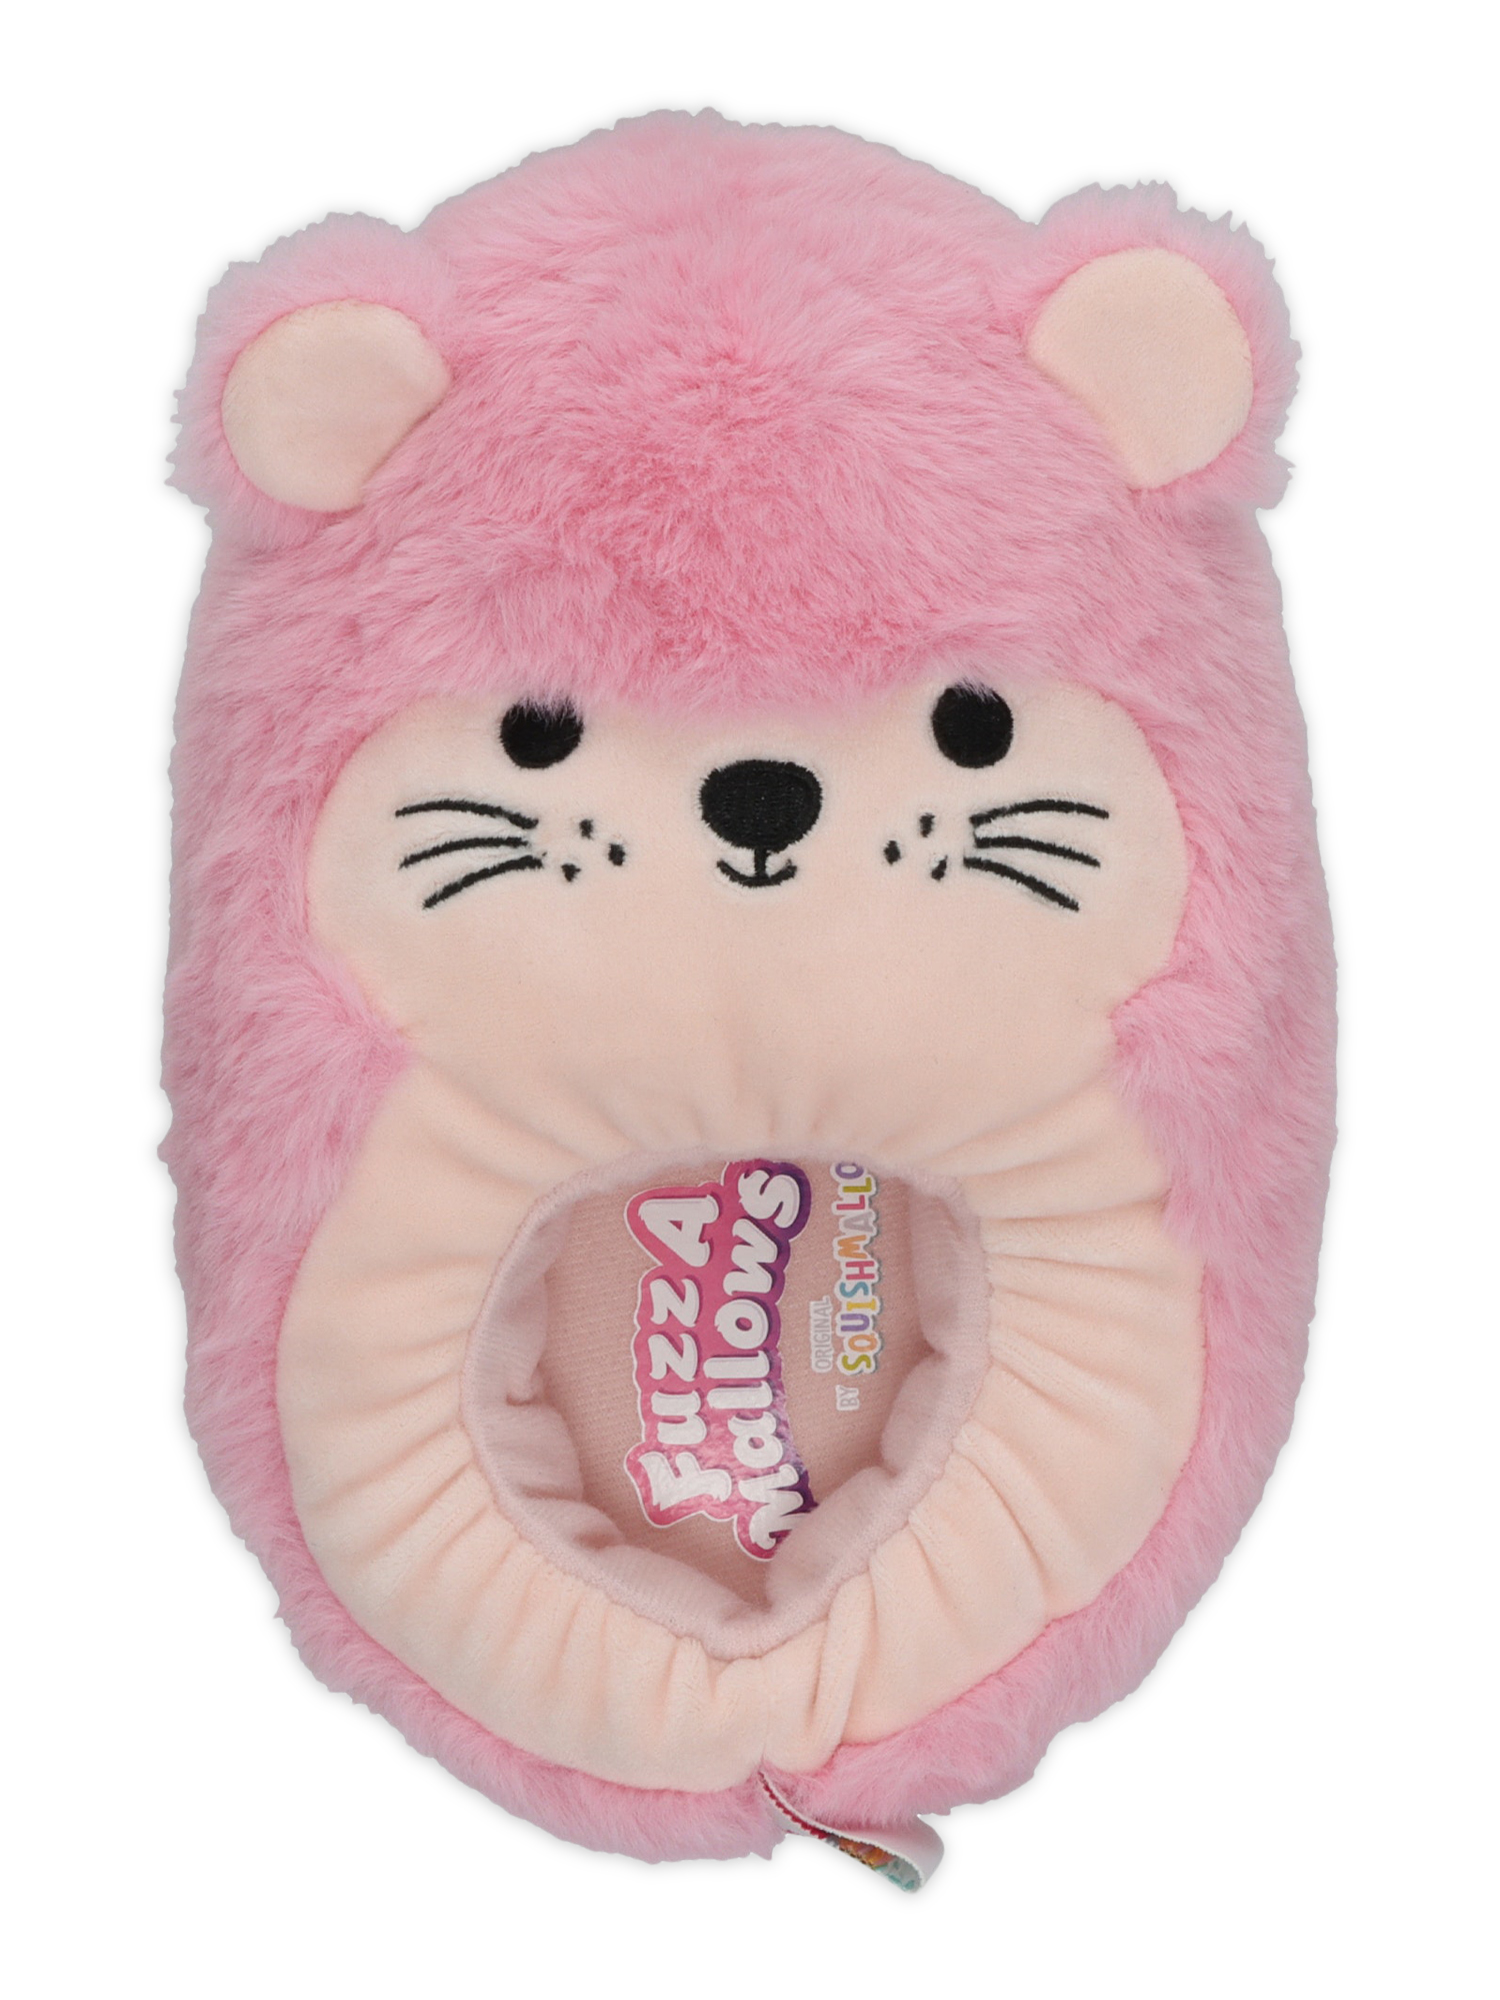 Squishmallows Toddler & Kids Anu the Hamster Slipper - image 1 of 6